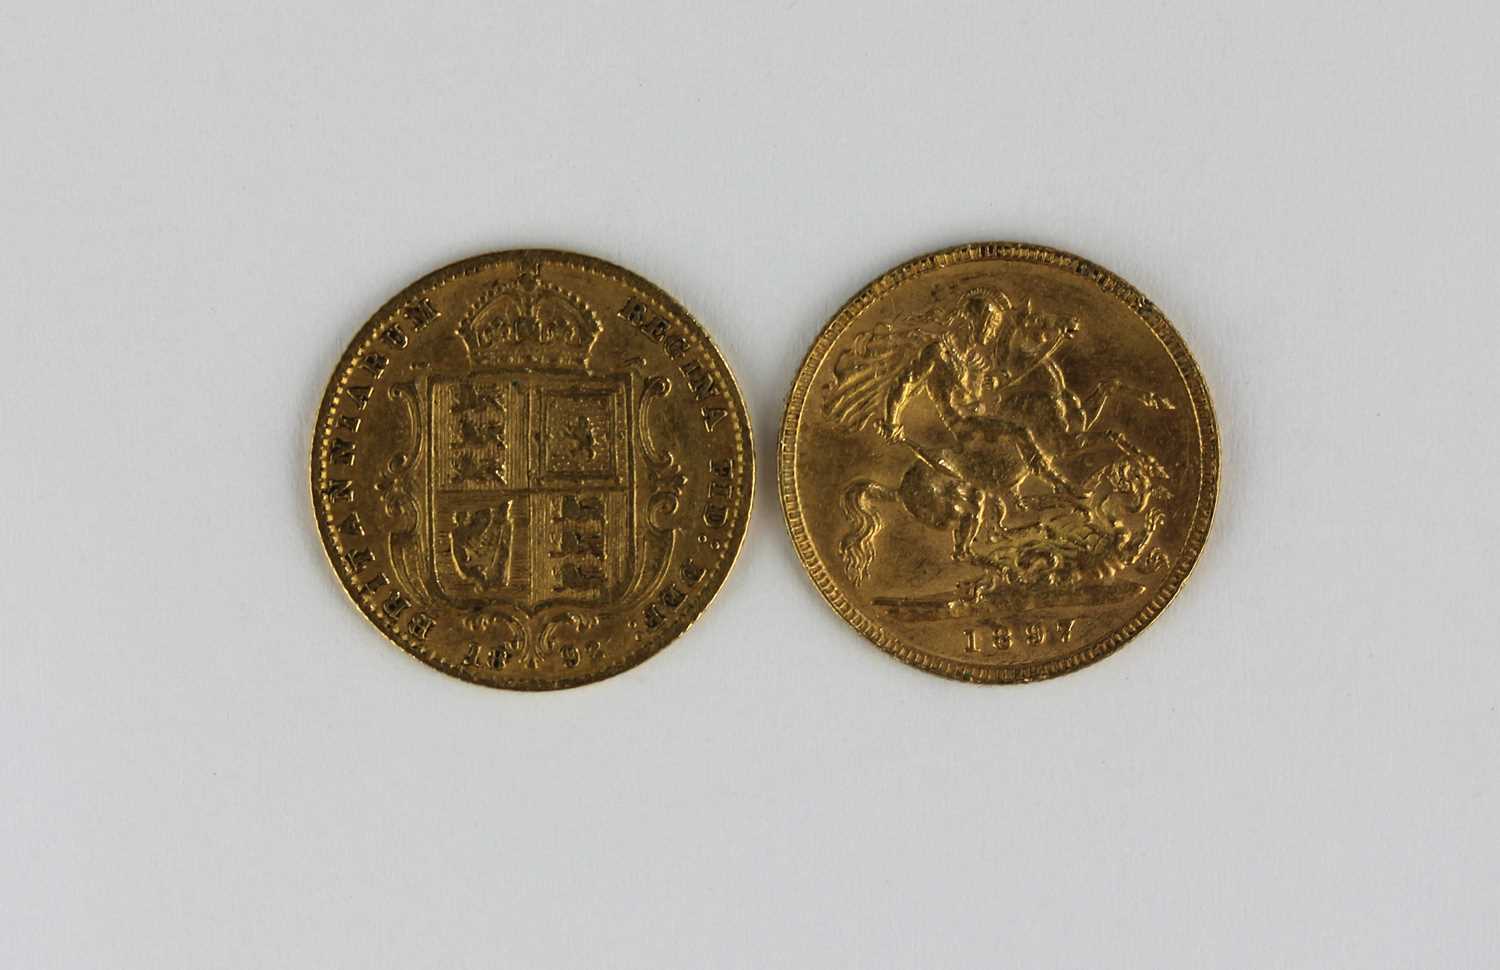 A Victoria Jubilee head half sovereign 1892 and a Victoria old head half sovereign 1897 - Image 2 of 2